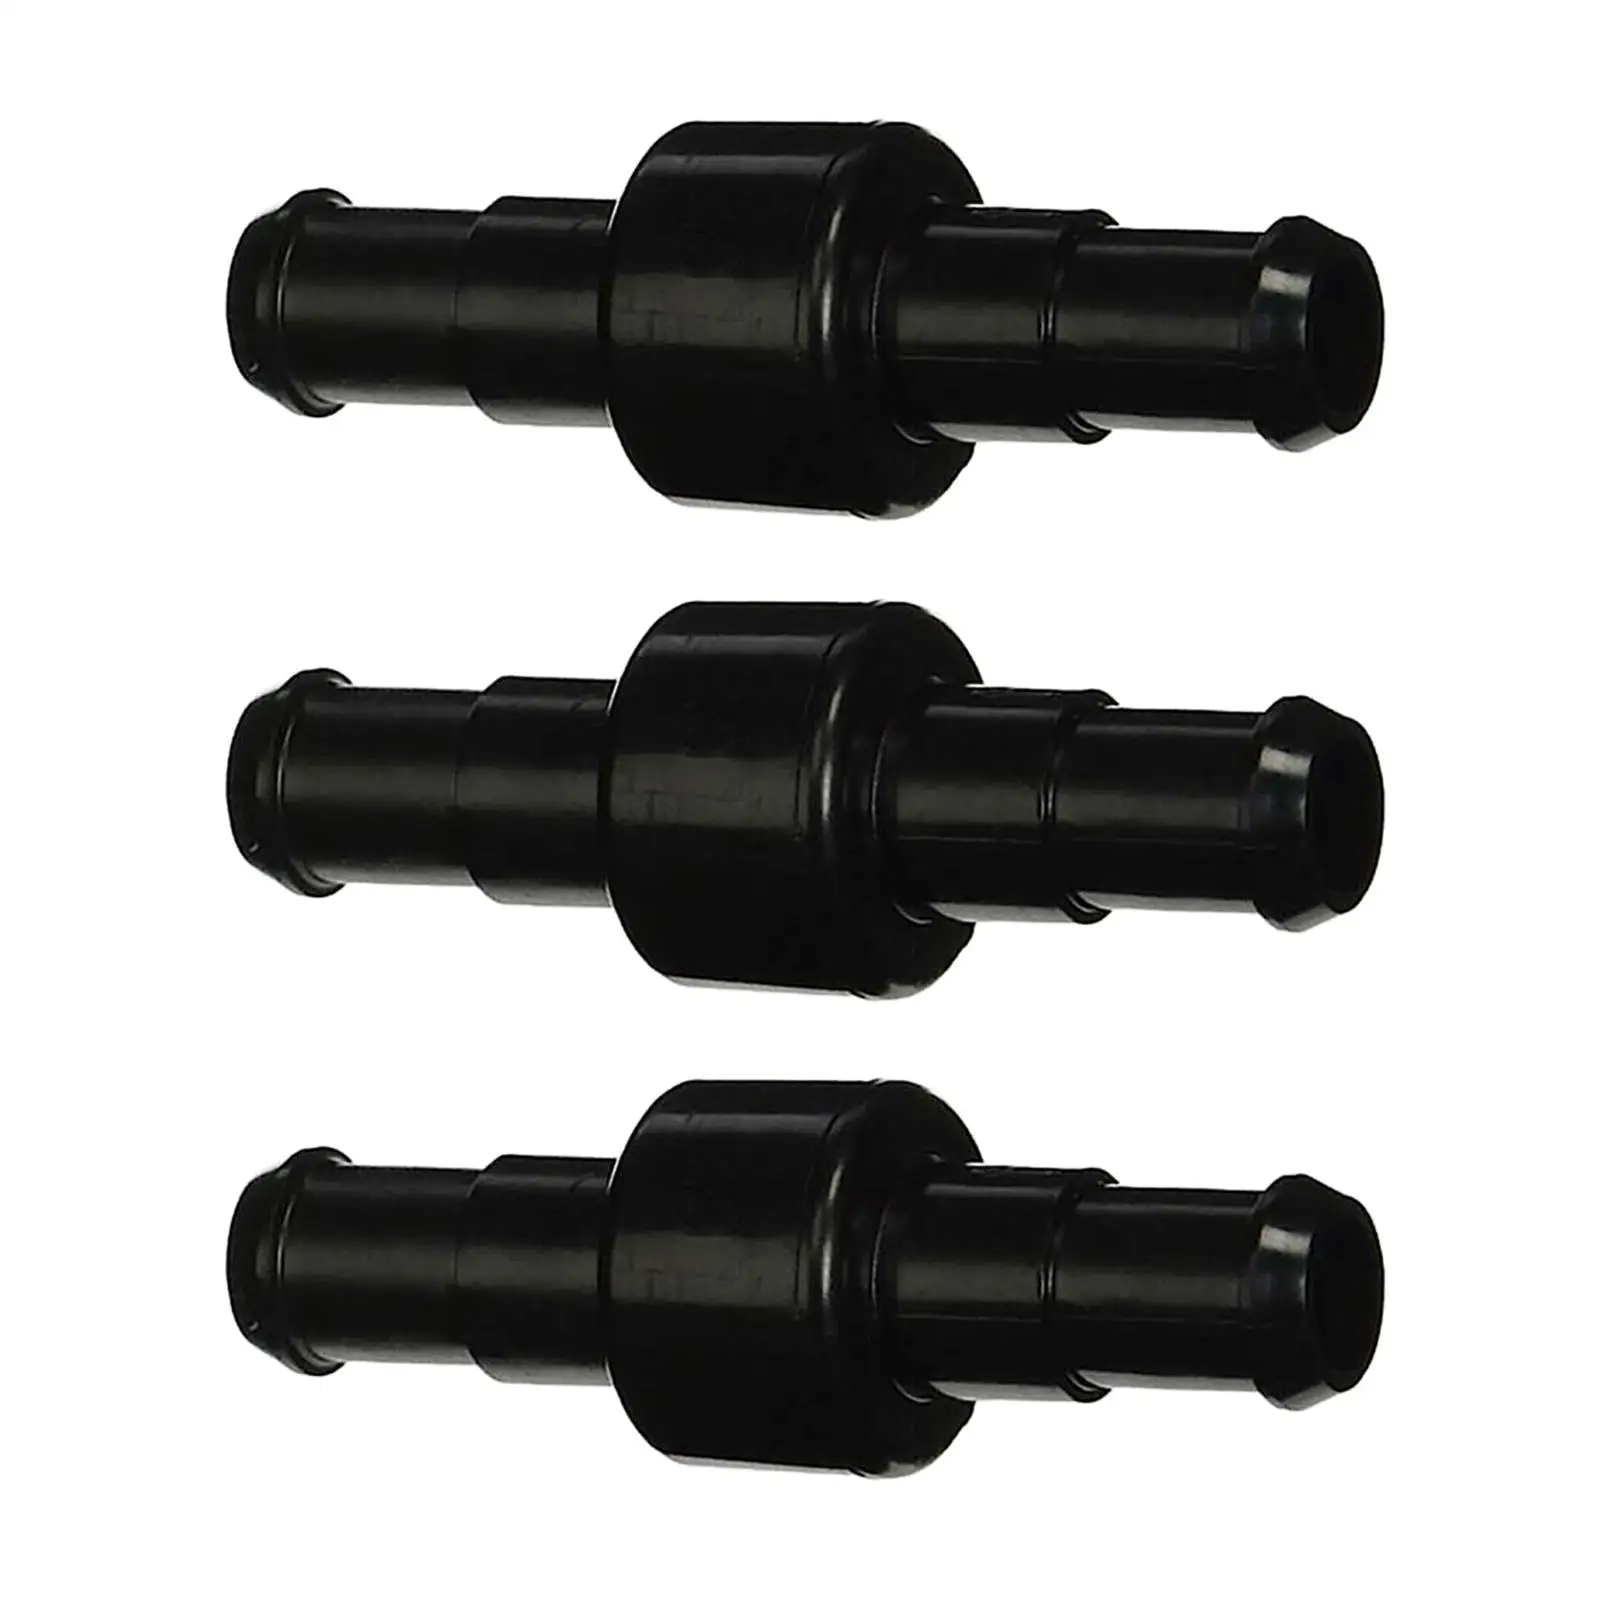 Pool Cleaner Hose Swivel Replaces Part Easy to Install Pool Hose Swivel Adapter Fittings for 280 Black F5B Pool Cleaner